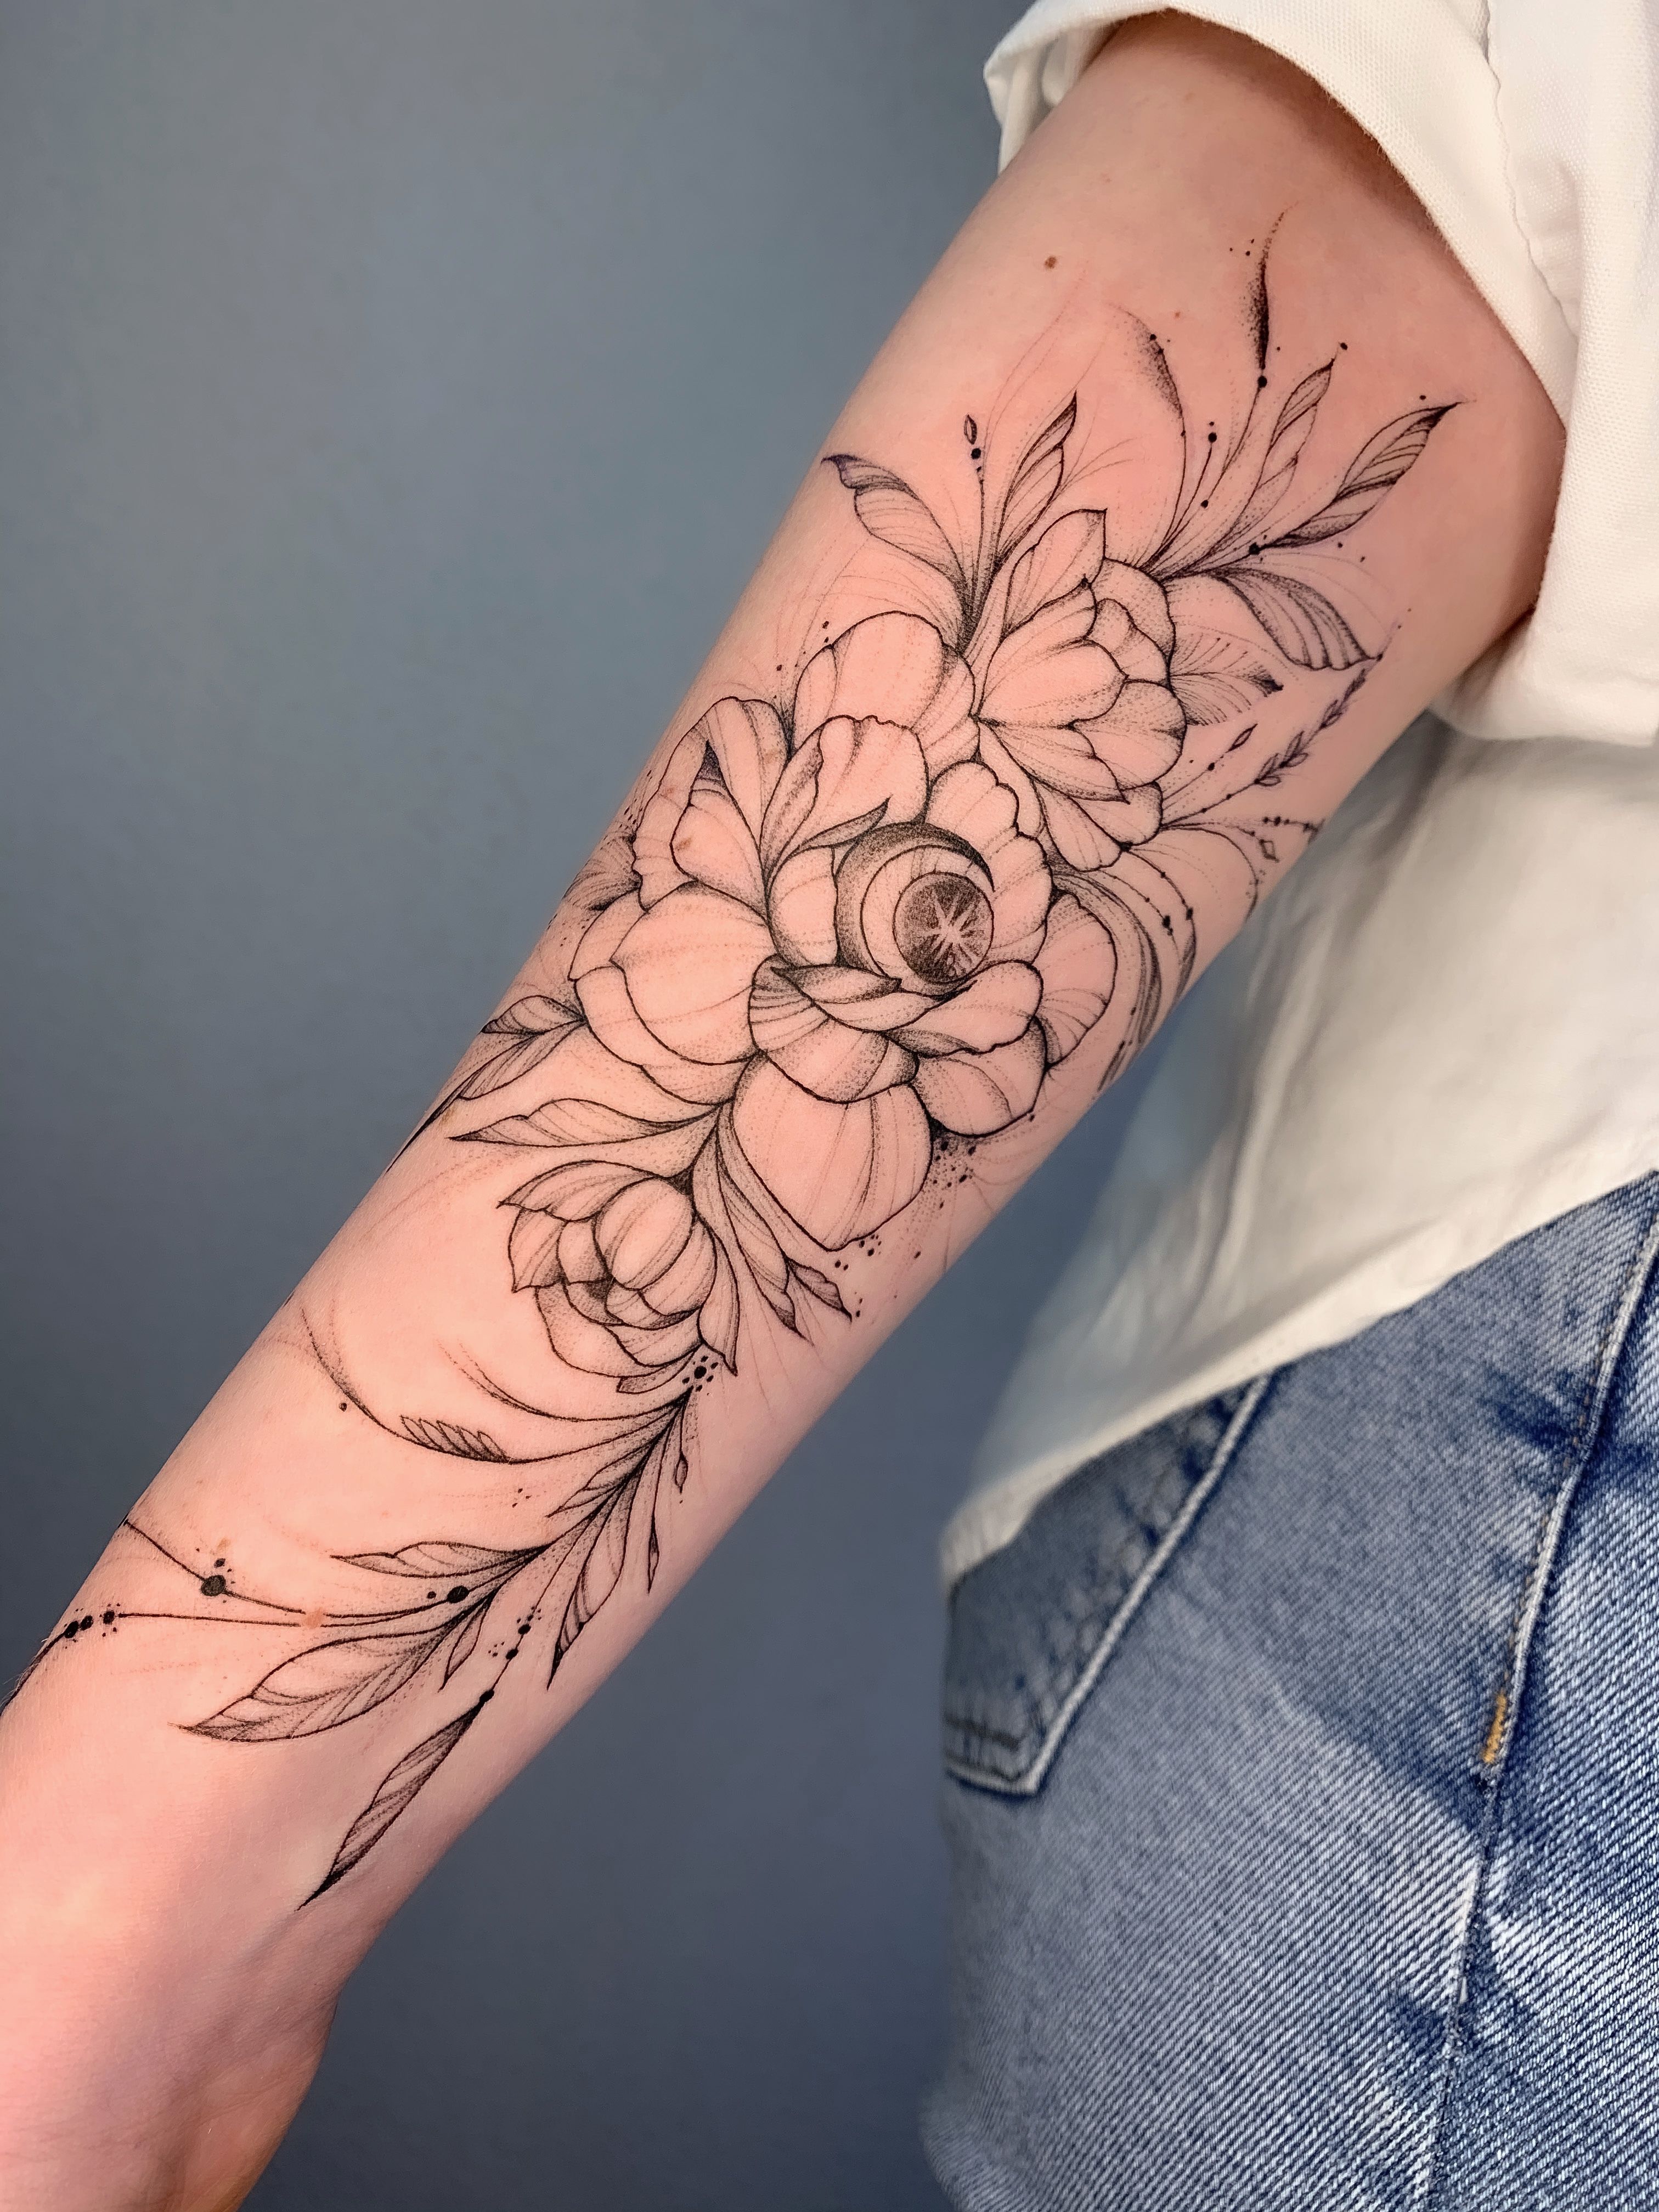 630 Flower Arm Tattoos Stock Photos Pictures  RoyaltyFree Images   iStock